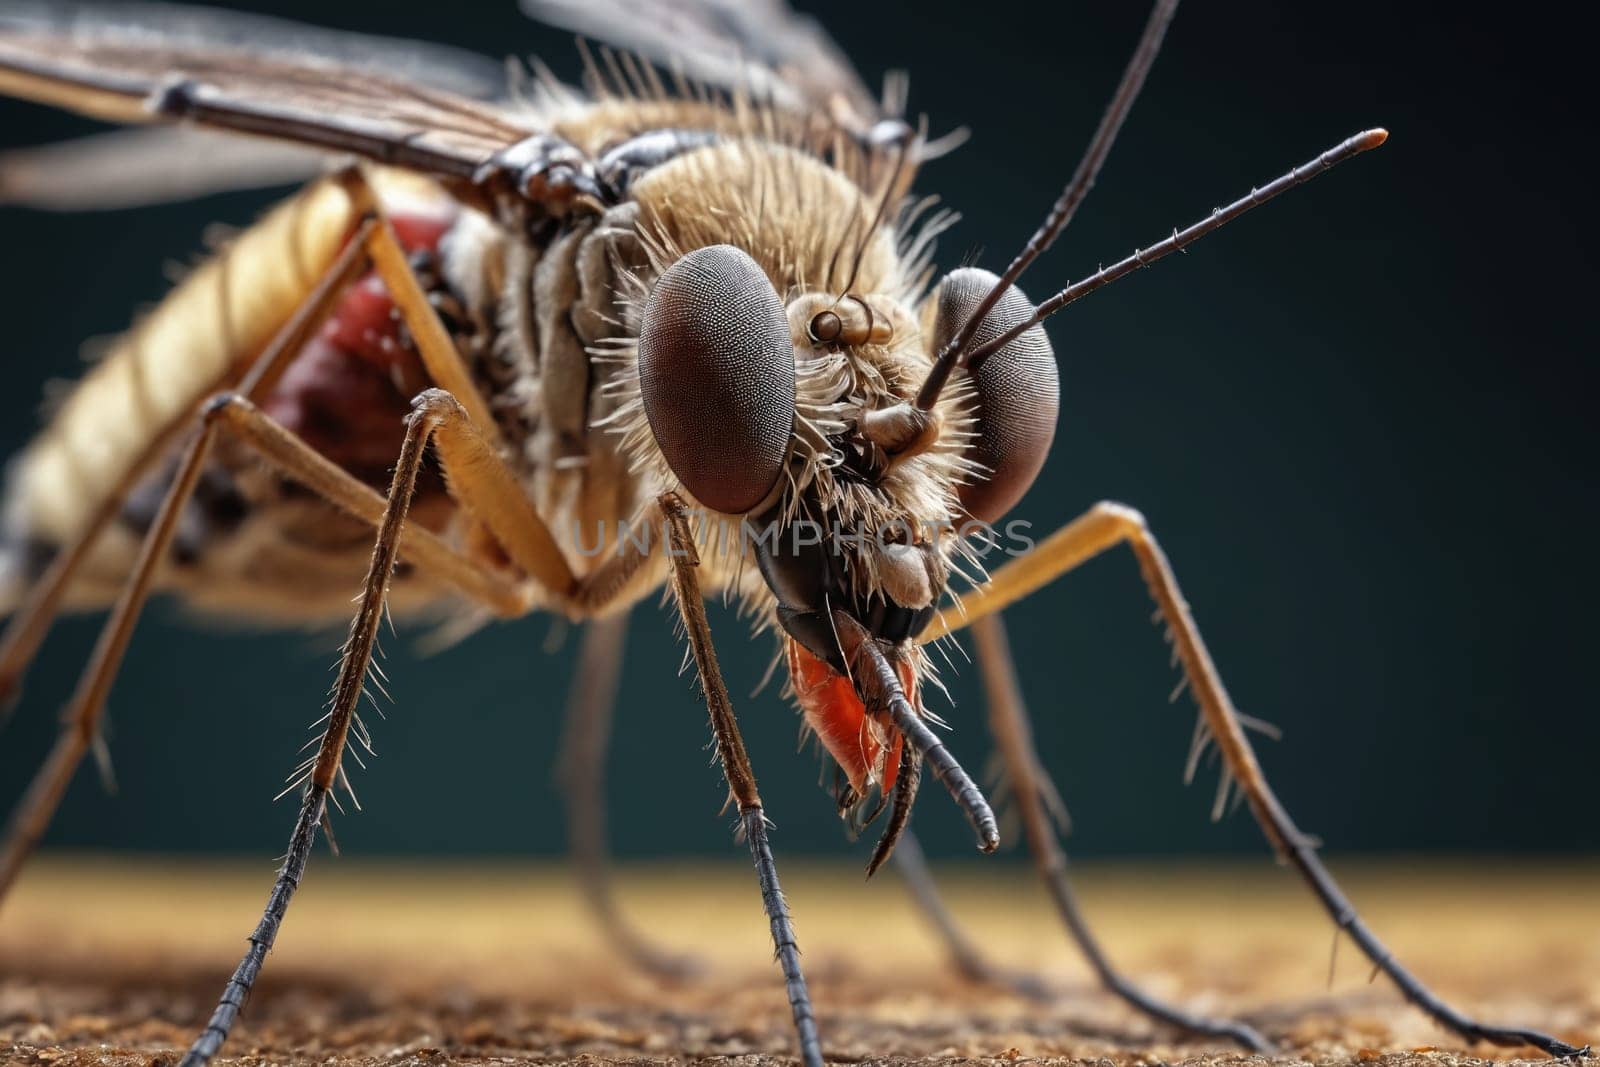 Fascinating view into the intricate details of a mosquito captured in this macro shot, making the unnoticed noticeably aesthetic. Great for usage in scientific research, biology education or nature-related content.